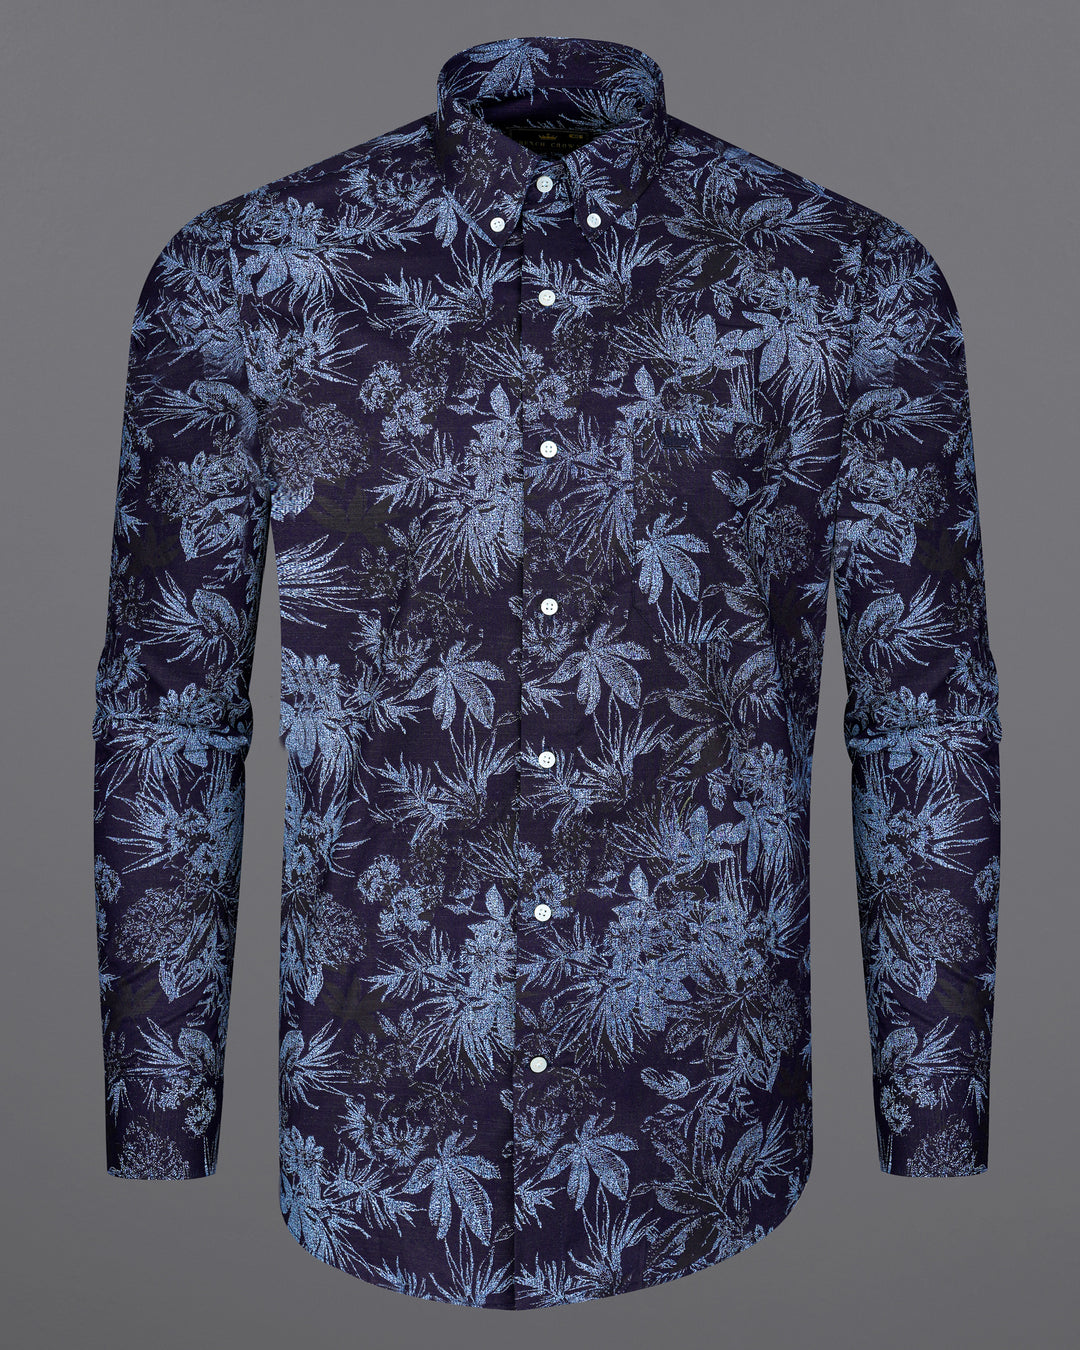 BLACKCURRANT NAVY BLUE WITH SHIP COVE BLUE FLORAL CHAMBRAY TEXTURED PREMIUM COTTON SHIRT